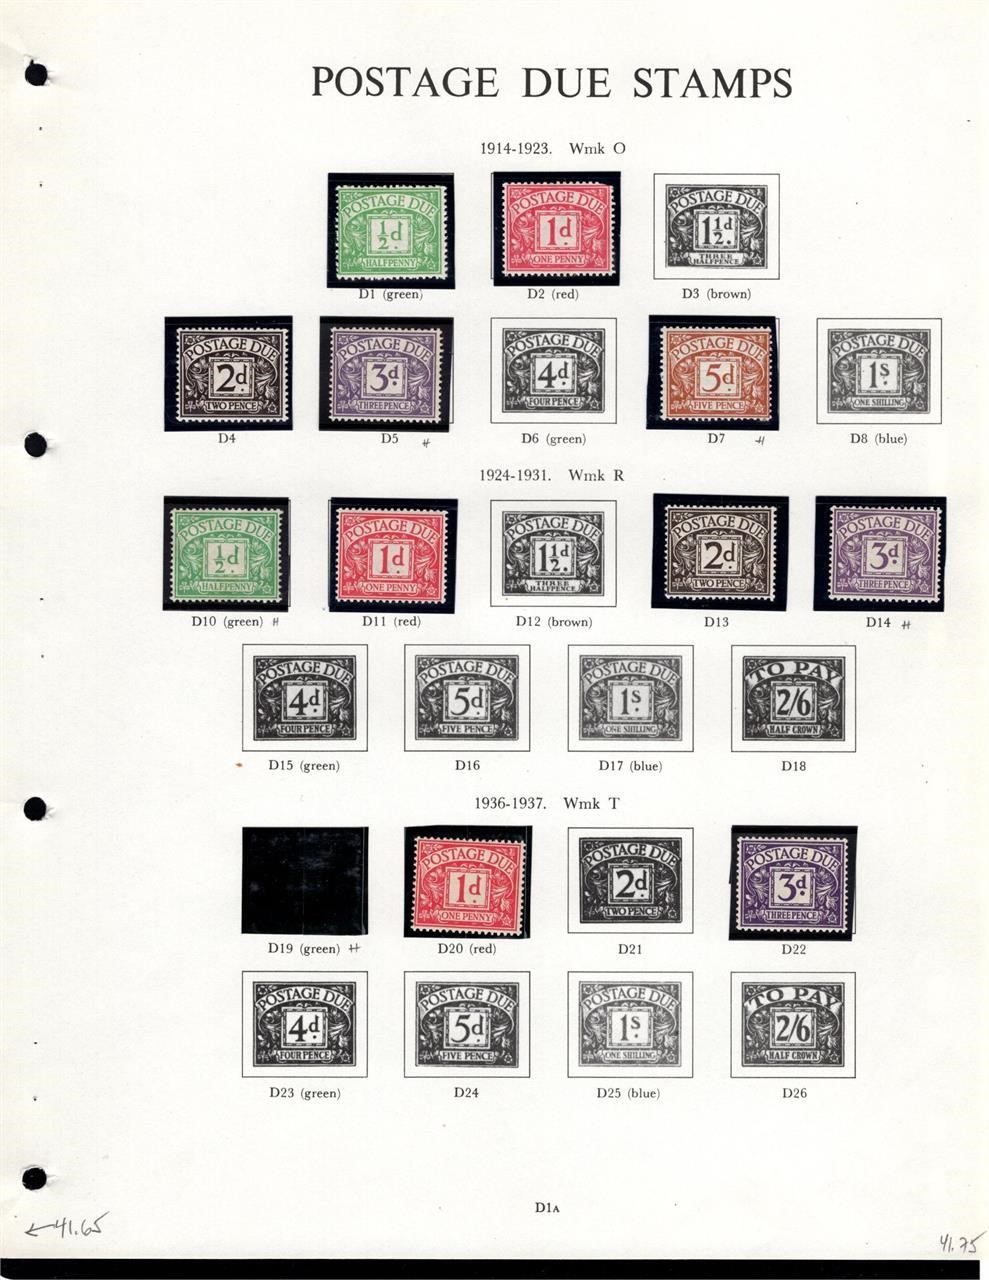 GREAT BRITAIN POSTAGE DUES COLLEC. SCV: $144.85